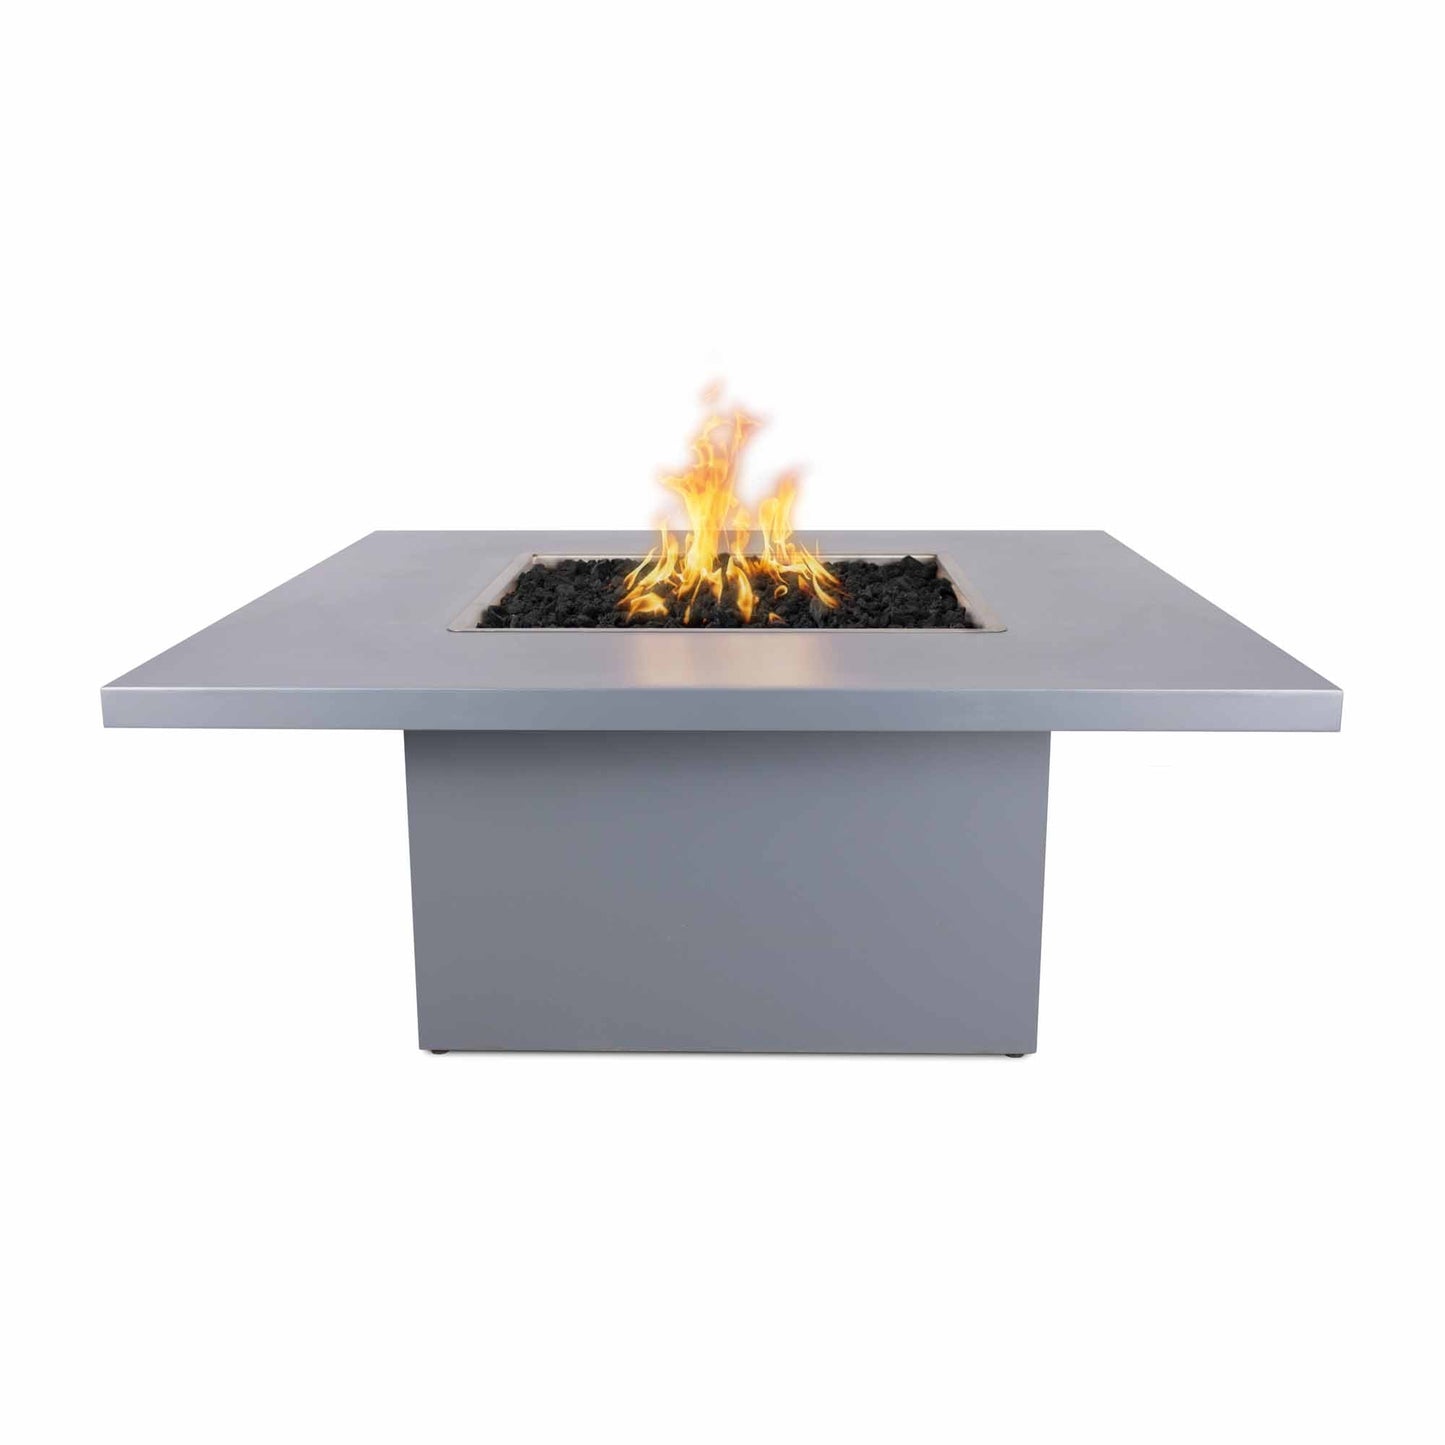 The Outdoor Plus Square Bella 36" Hammered Copper Liquid Propane Fire Pit with 110V Electronic Ignition